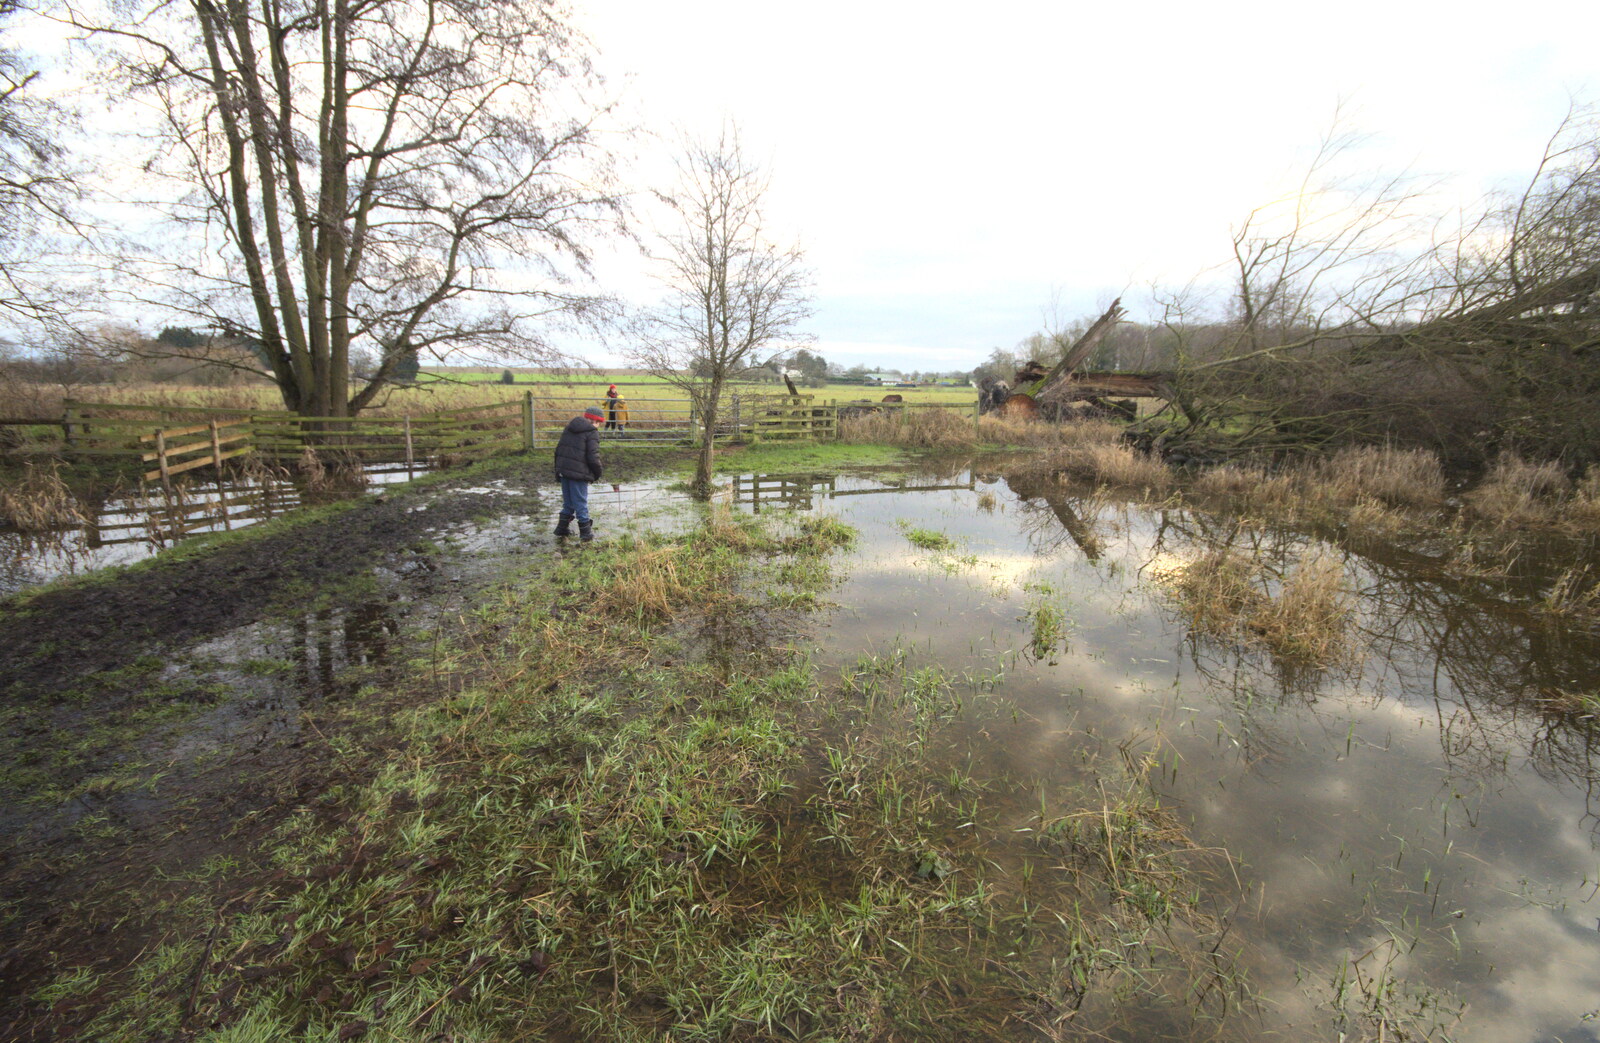 Fred navigates the flooded path from A Walk Around Redgrave and Lopham Fen, Redgrave, Suffolk - 3rd January 2021